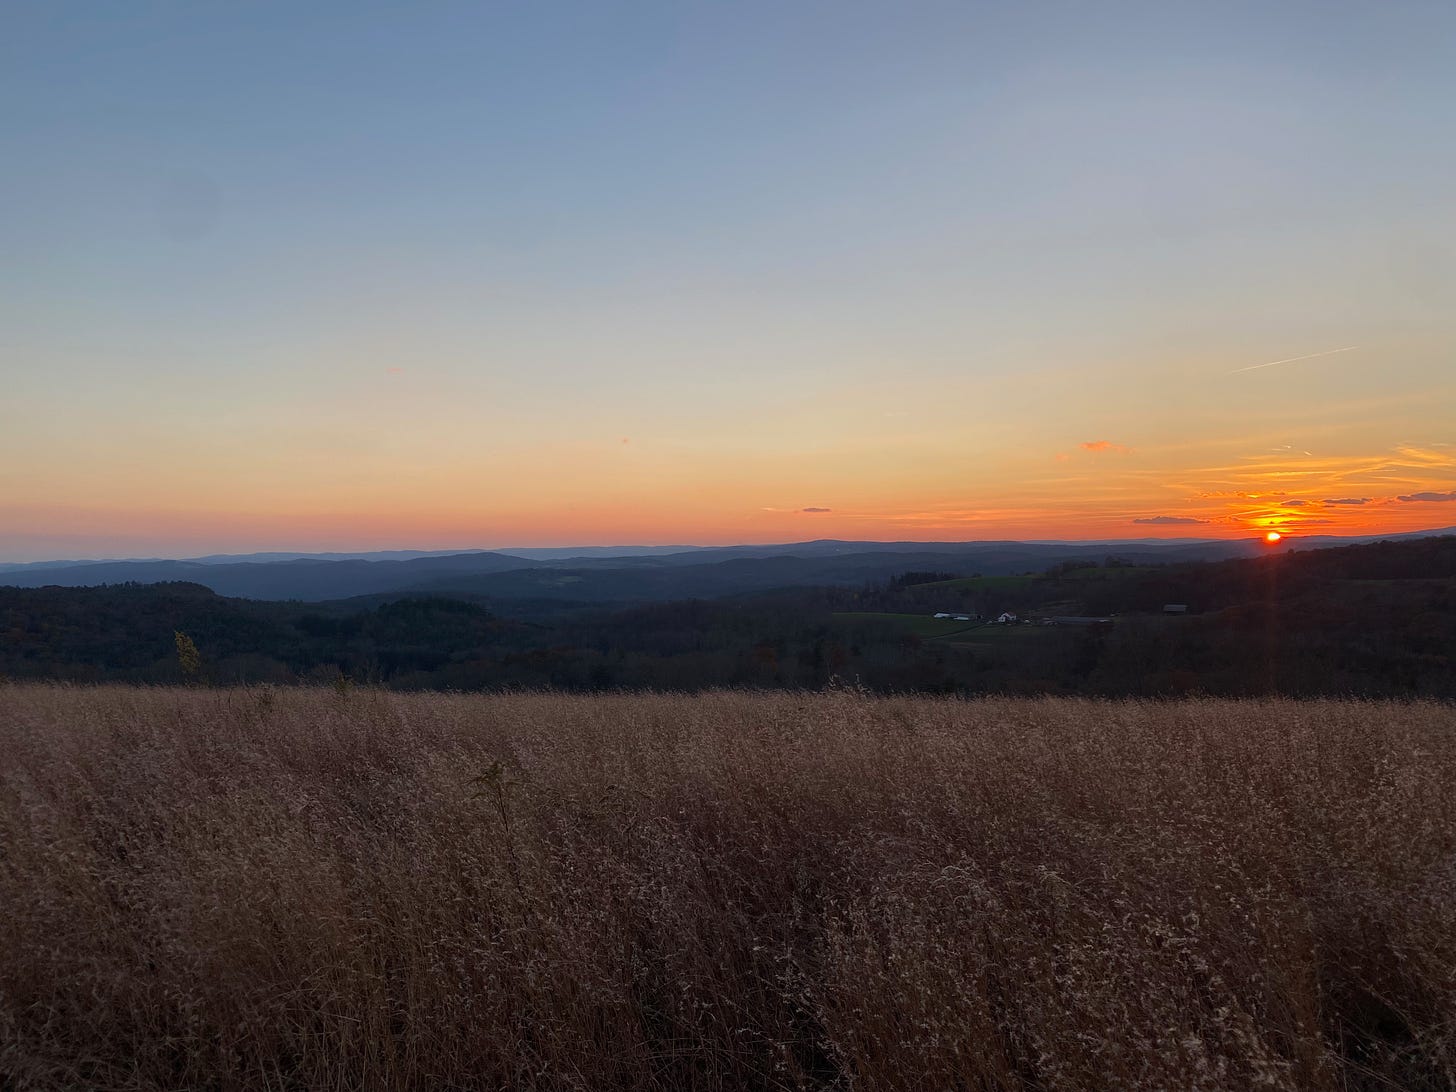 A field of tall brown grass on a ridgetop at sunset. The sun sets small and orange behind a line of blue and purple hills on the horizon.